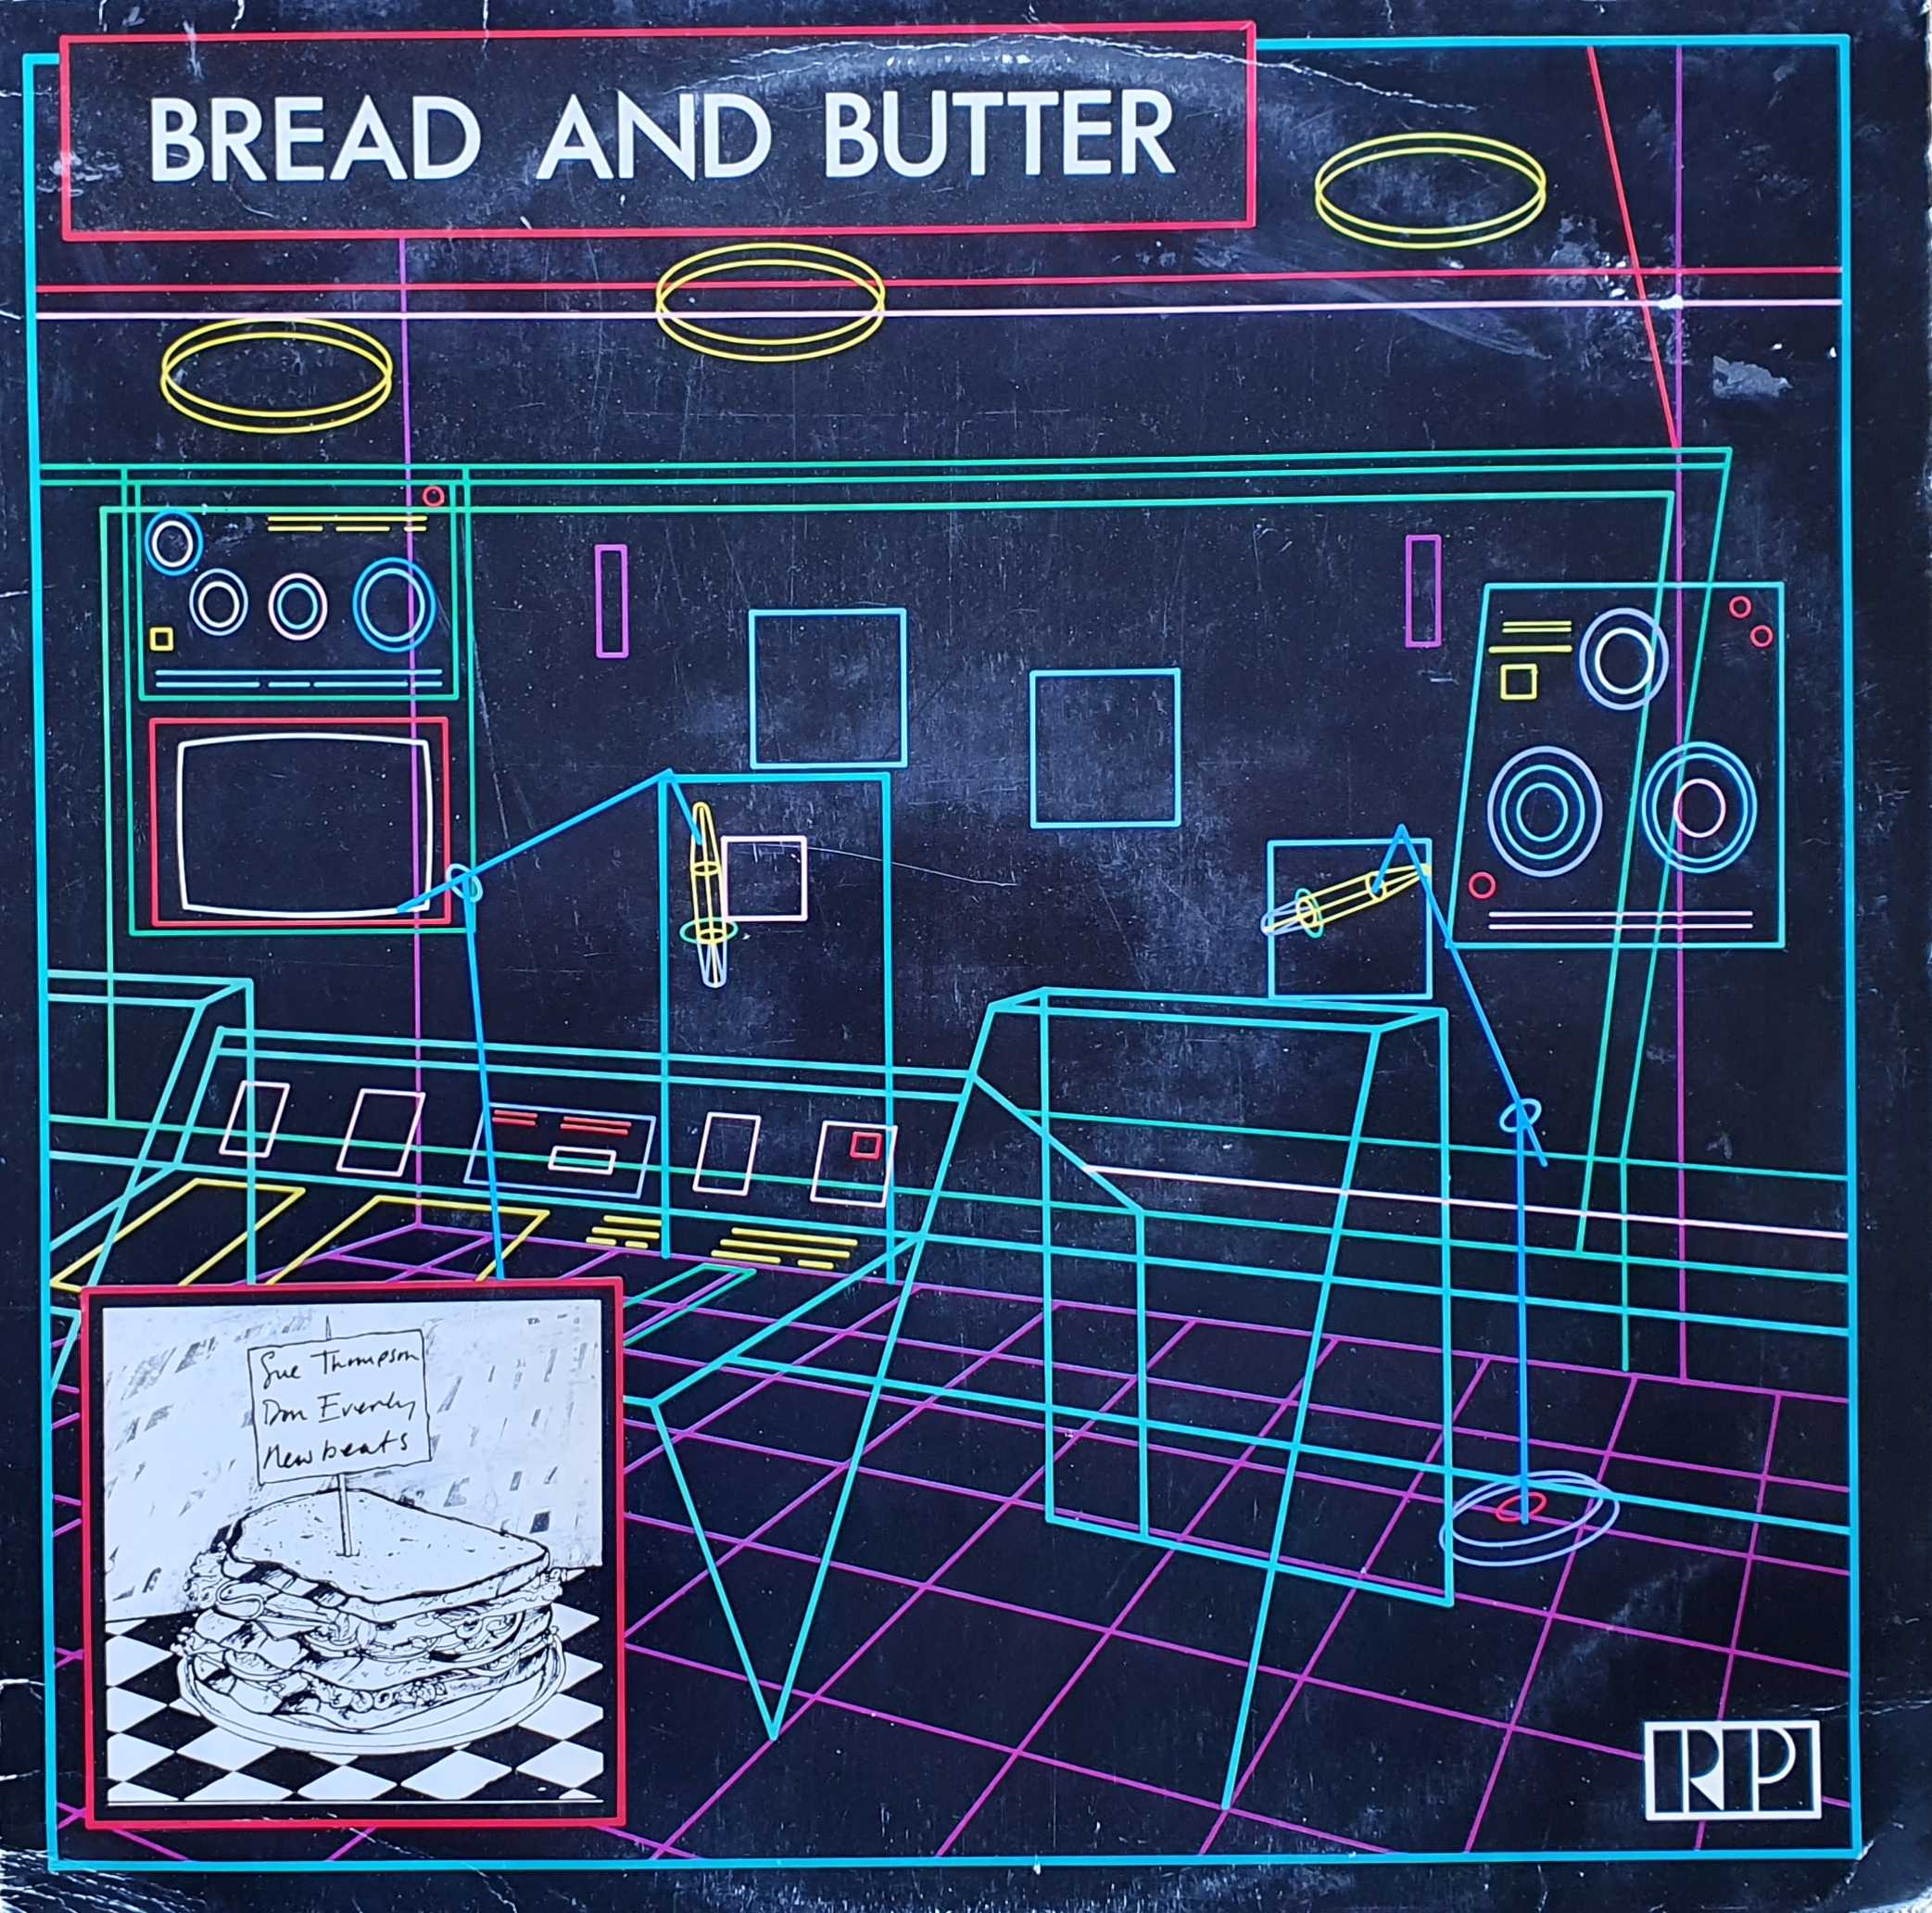 Picture of TAIR 85034 Bread and butter by artist Don Everly / Sue Thompson from the BBC albums - Records and Tapes library